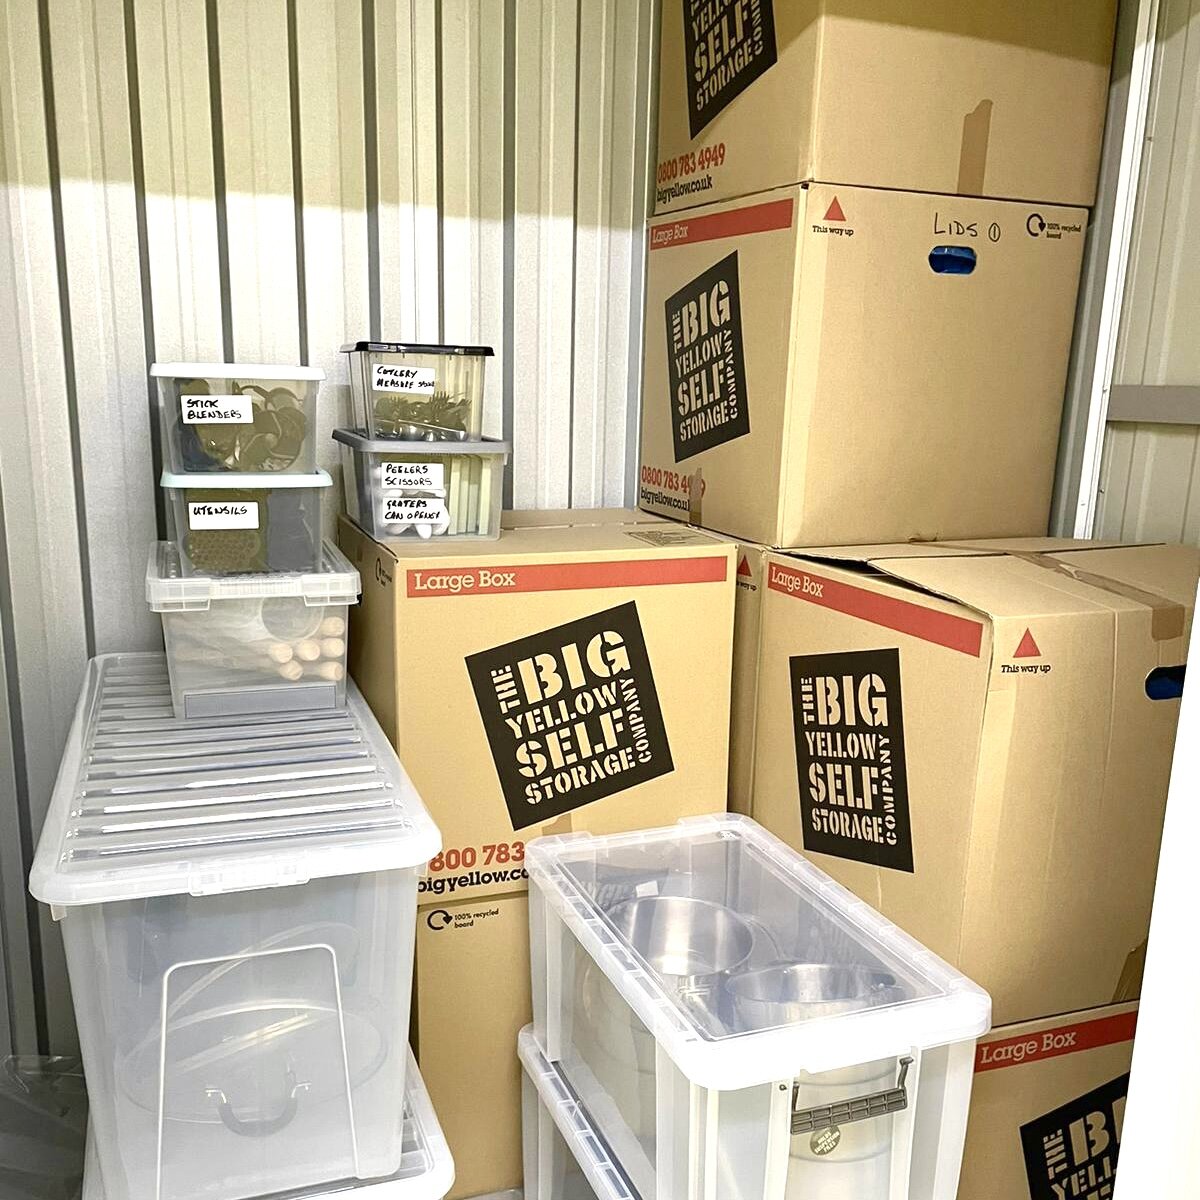 HAPPY FRIDAY EVERYONE!

It's a happy day at Cooking Up as we received more kitchen equipment at our storage facility at @bigyellowstorage for our mobile sessions. 

We are gearing up for our first mobile series later this month at Ham Children's Cent